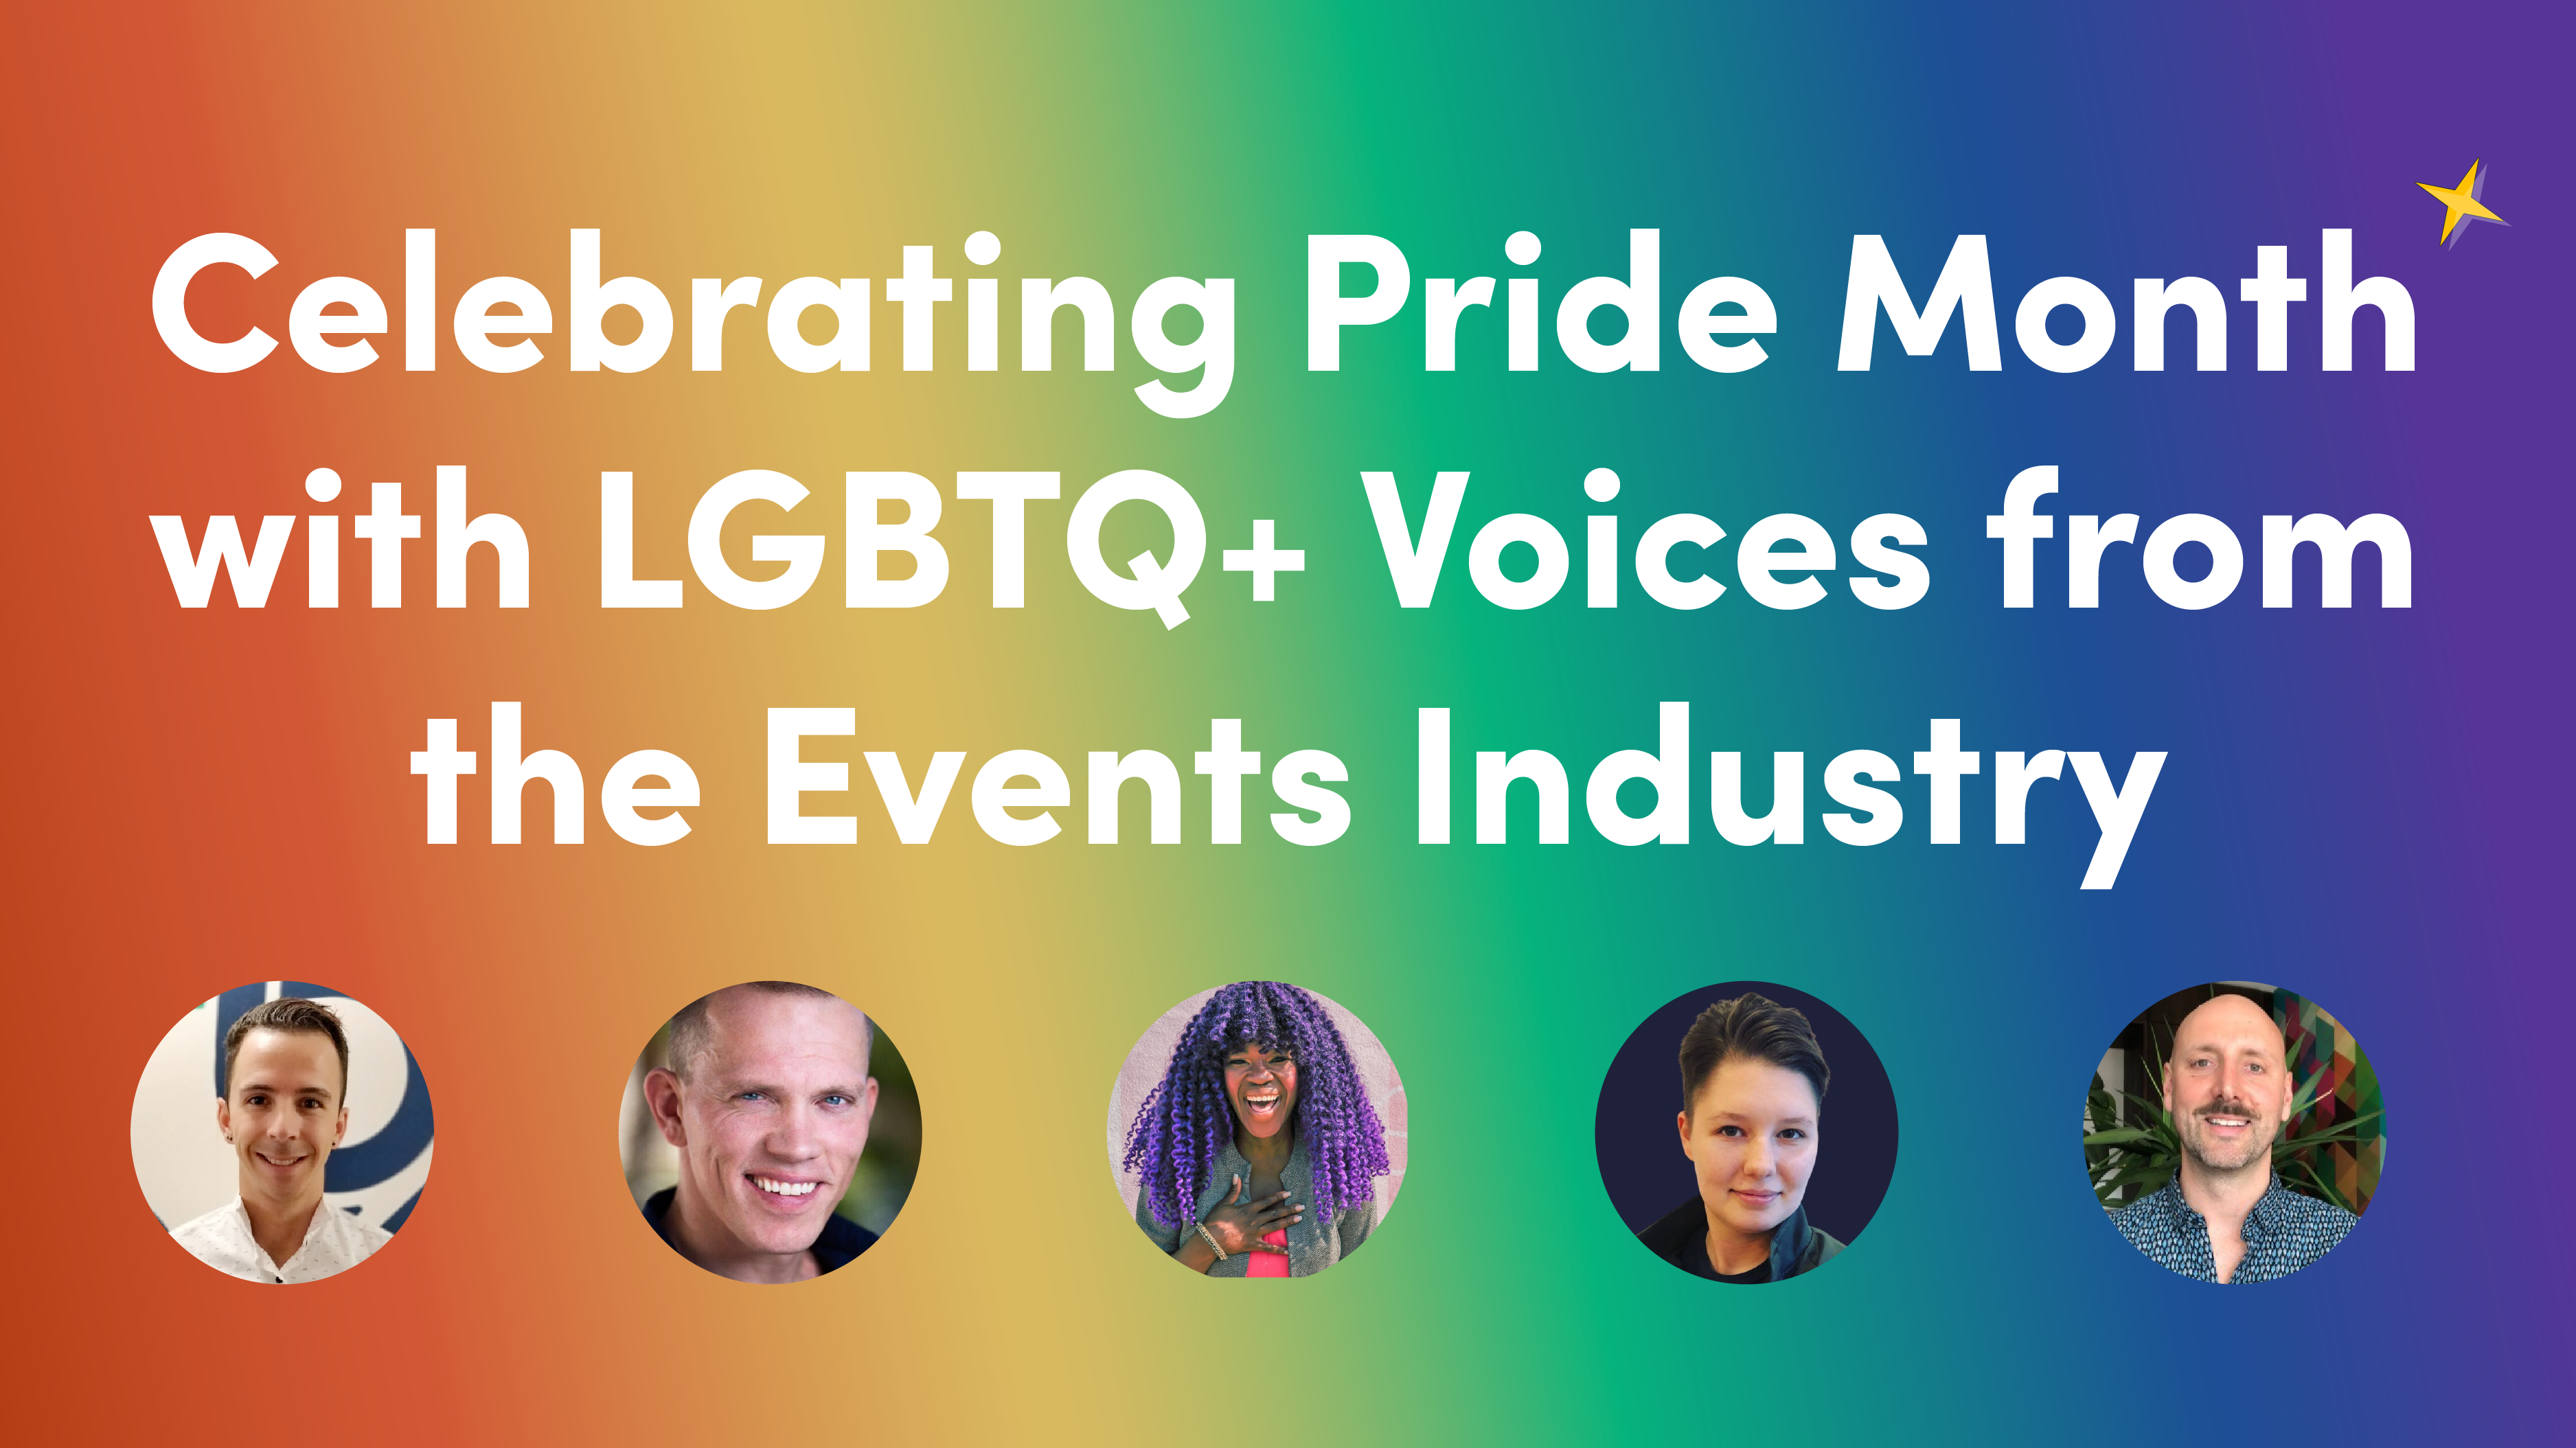 Celebrating Pride Month with LGBTQ+ Voices from the Events Industry